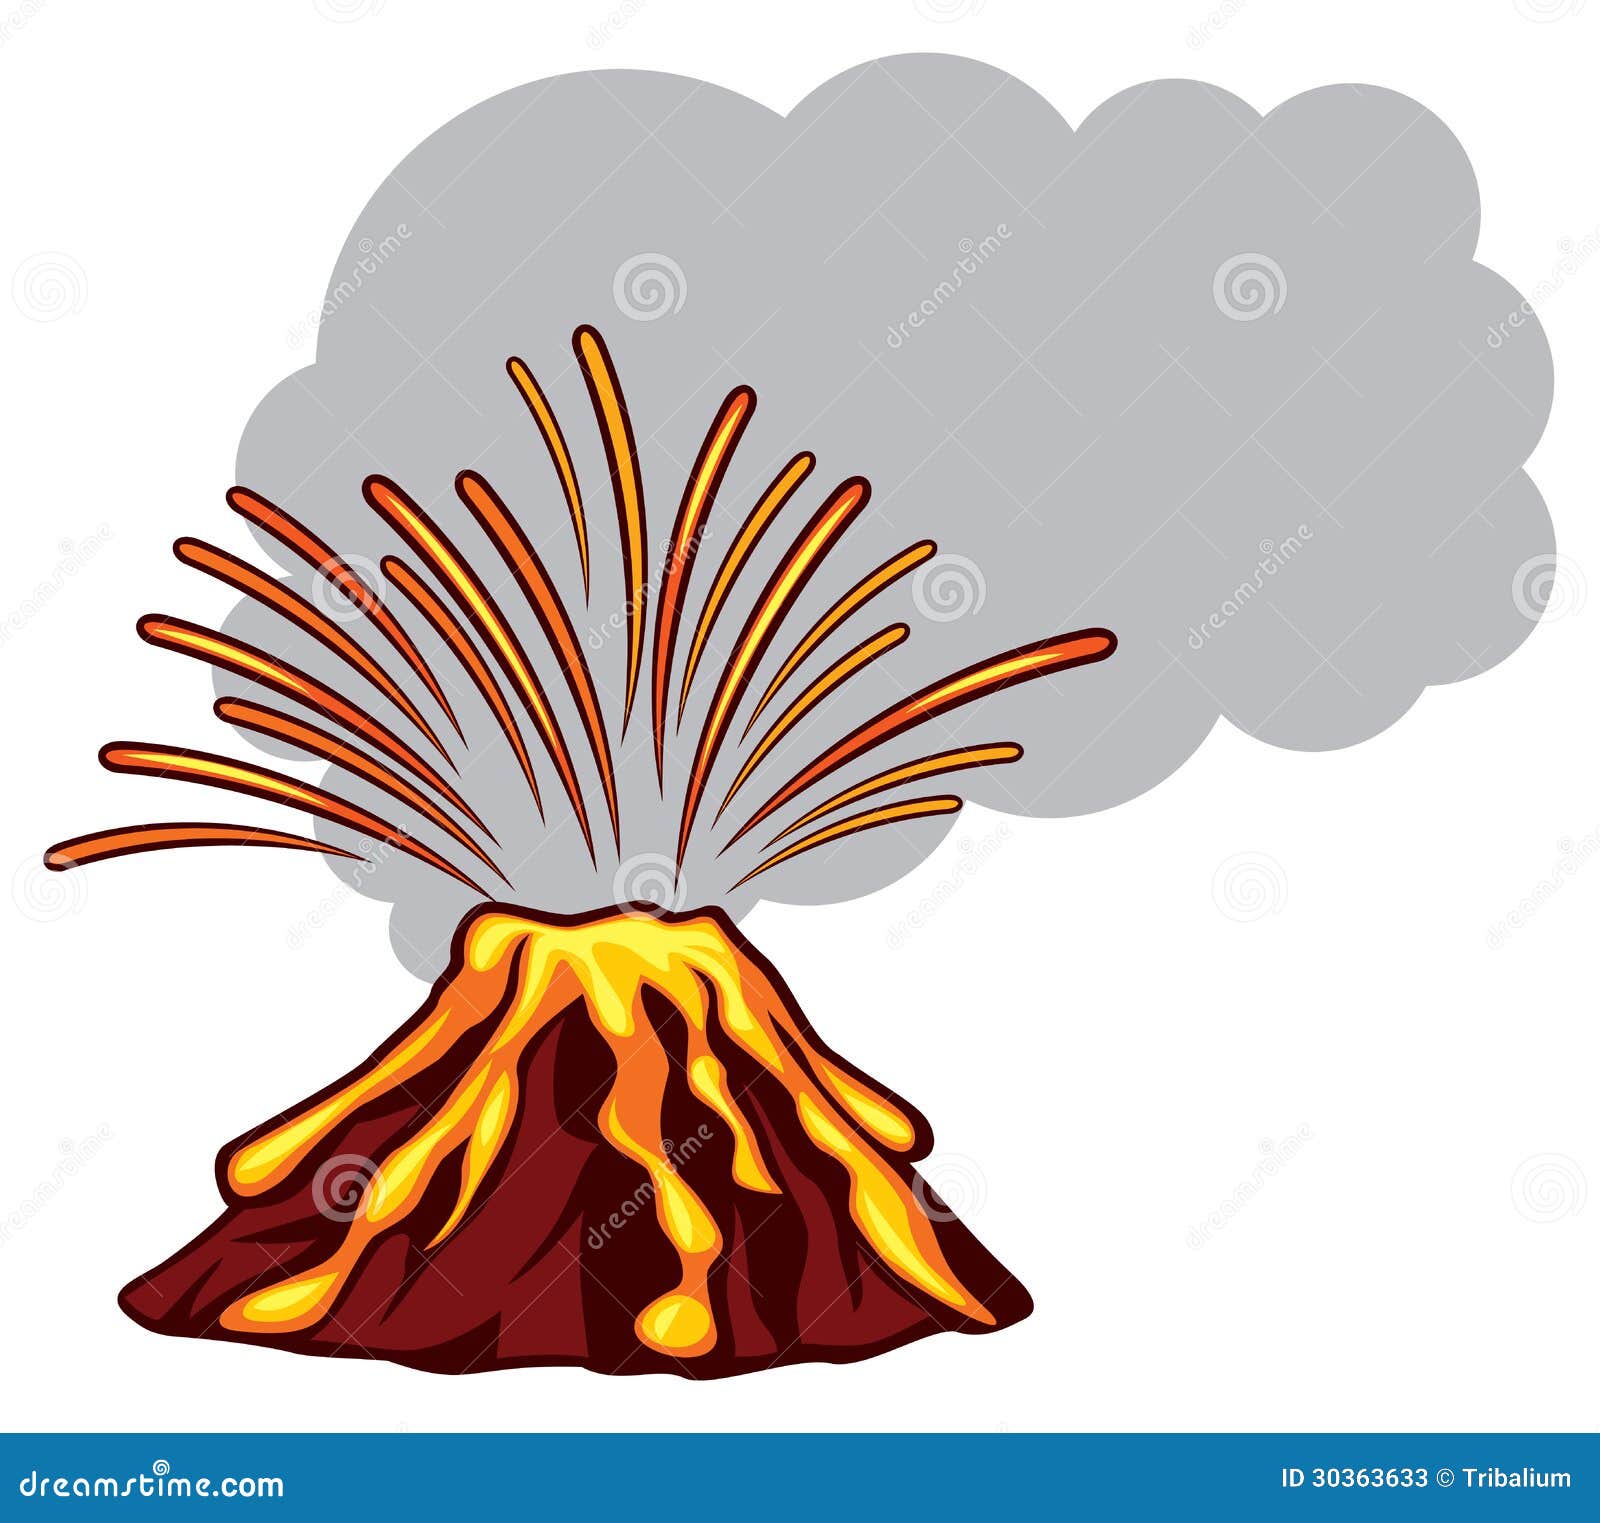 volcano clipart images - photo #45